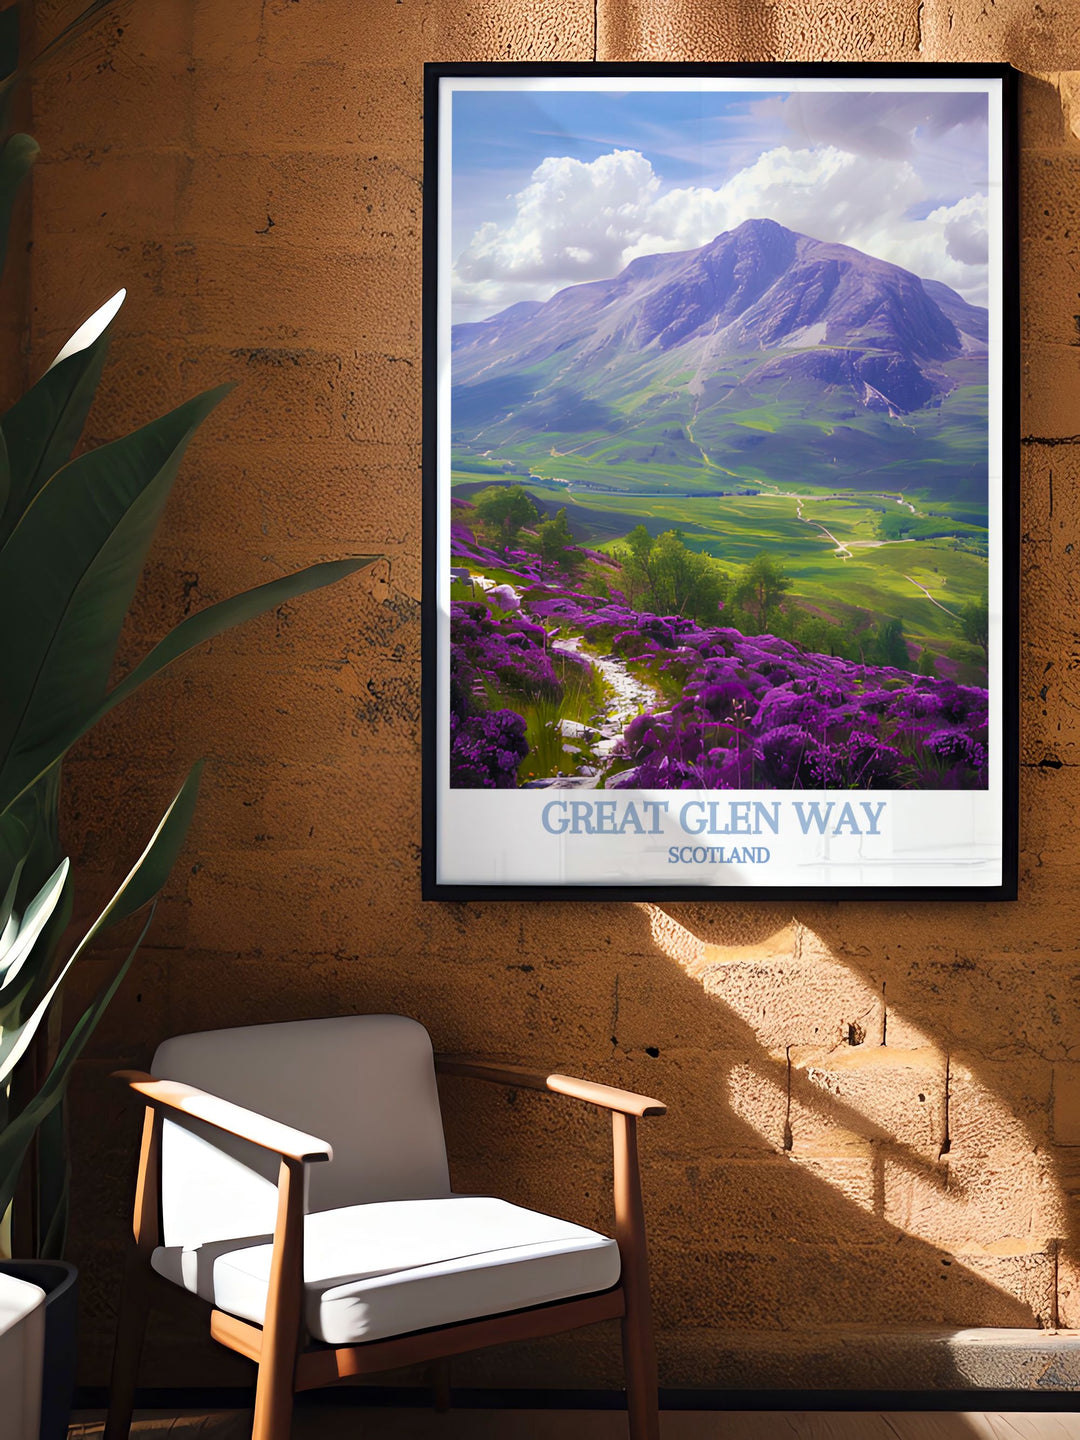 Highlighting the majestic Ben Nevis, this travel poster showcases Scotlands highest peak along the Great Glen Way, ideal for bringing the rugged beauty of the Scottish Highlands into any space.